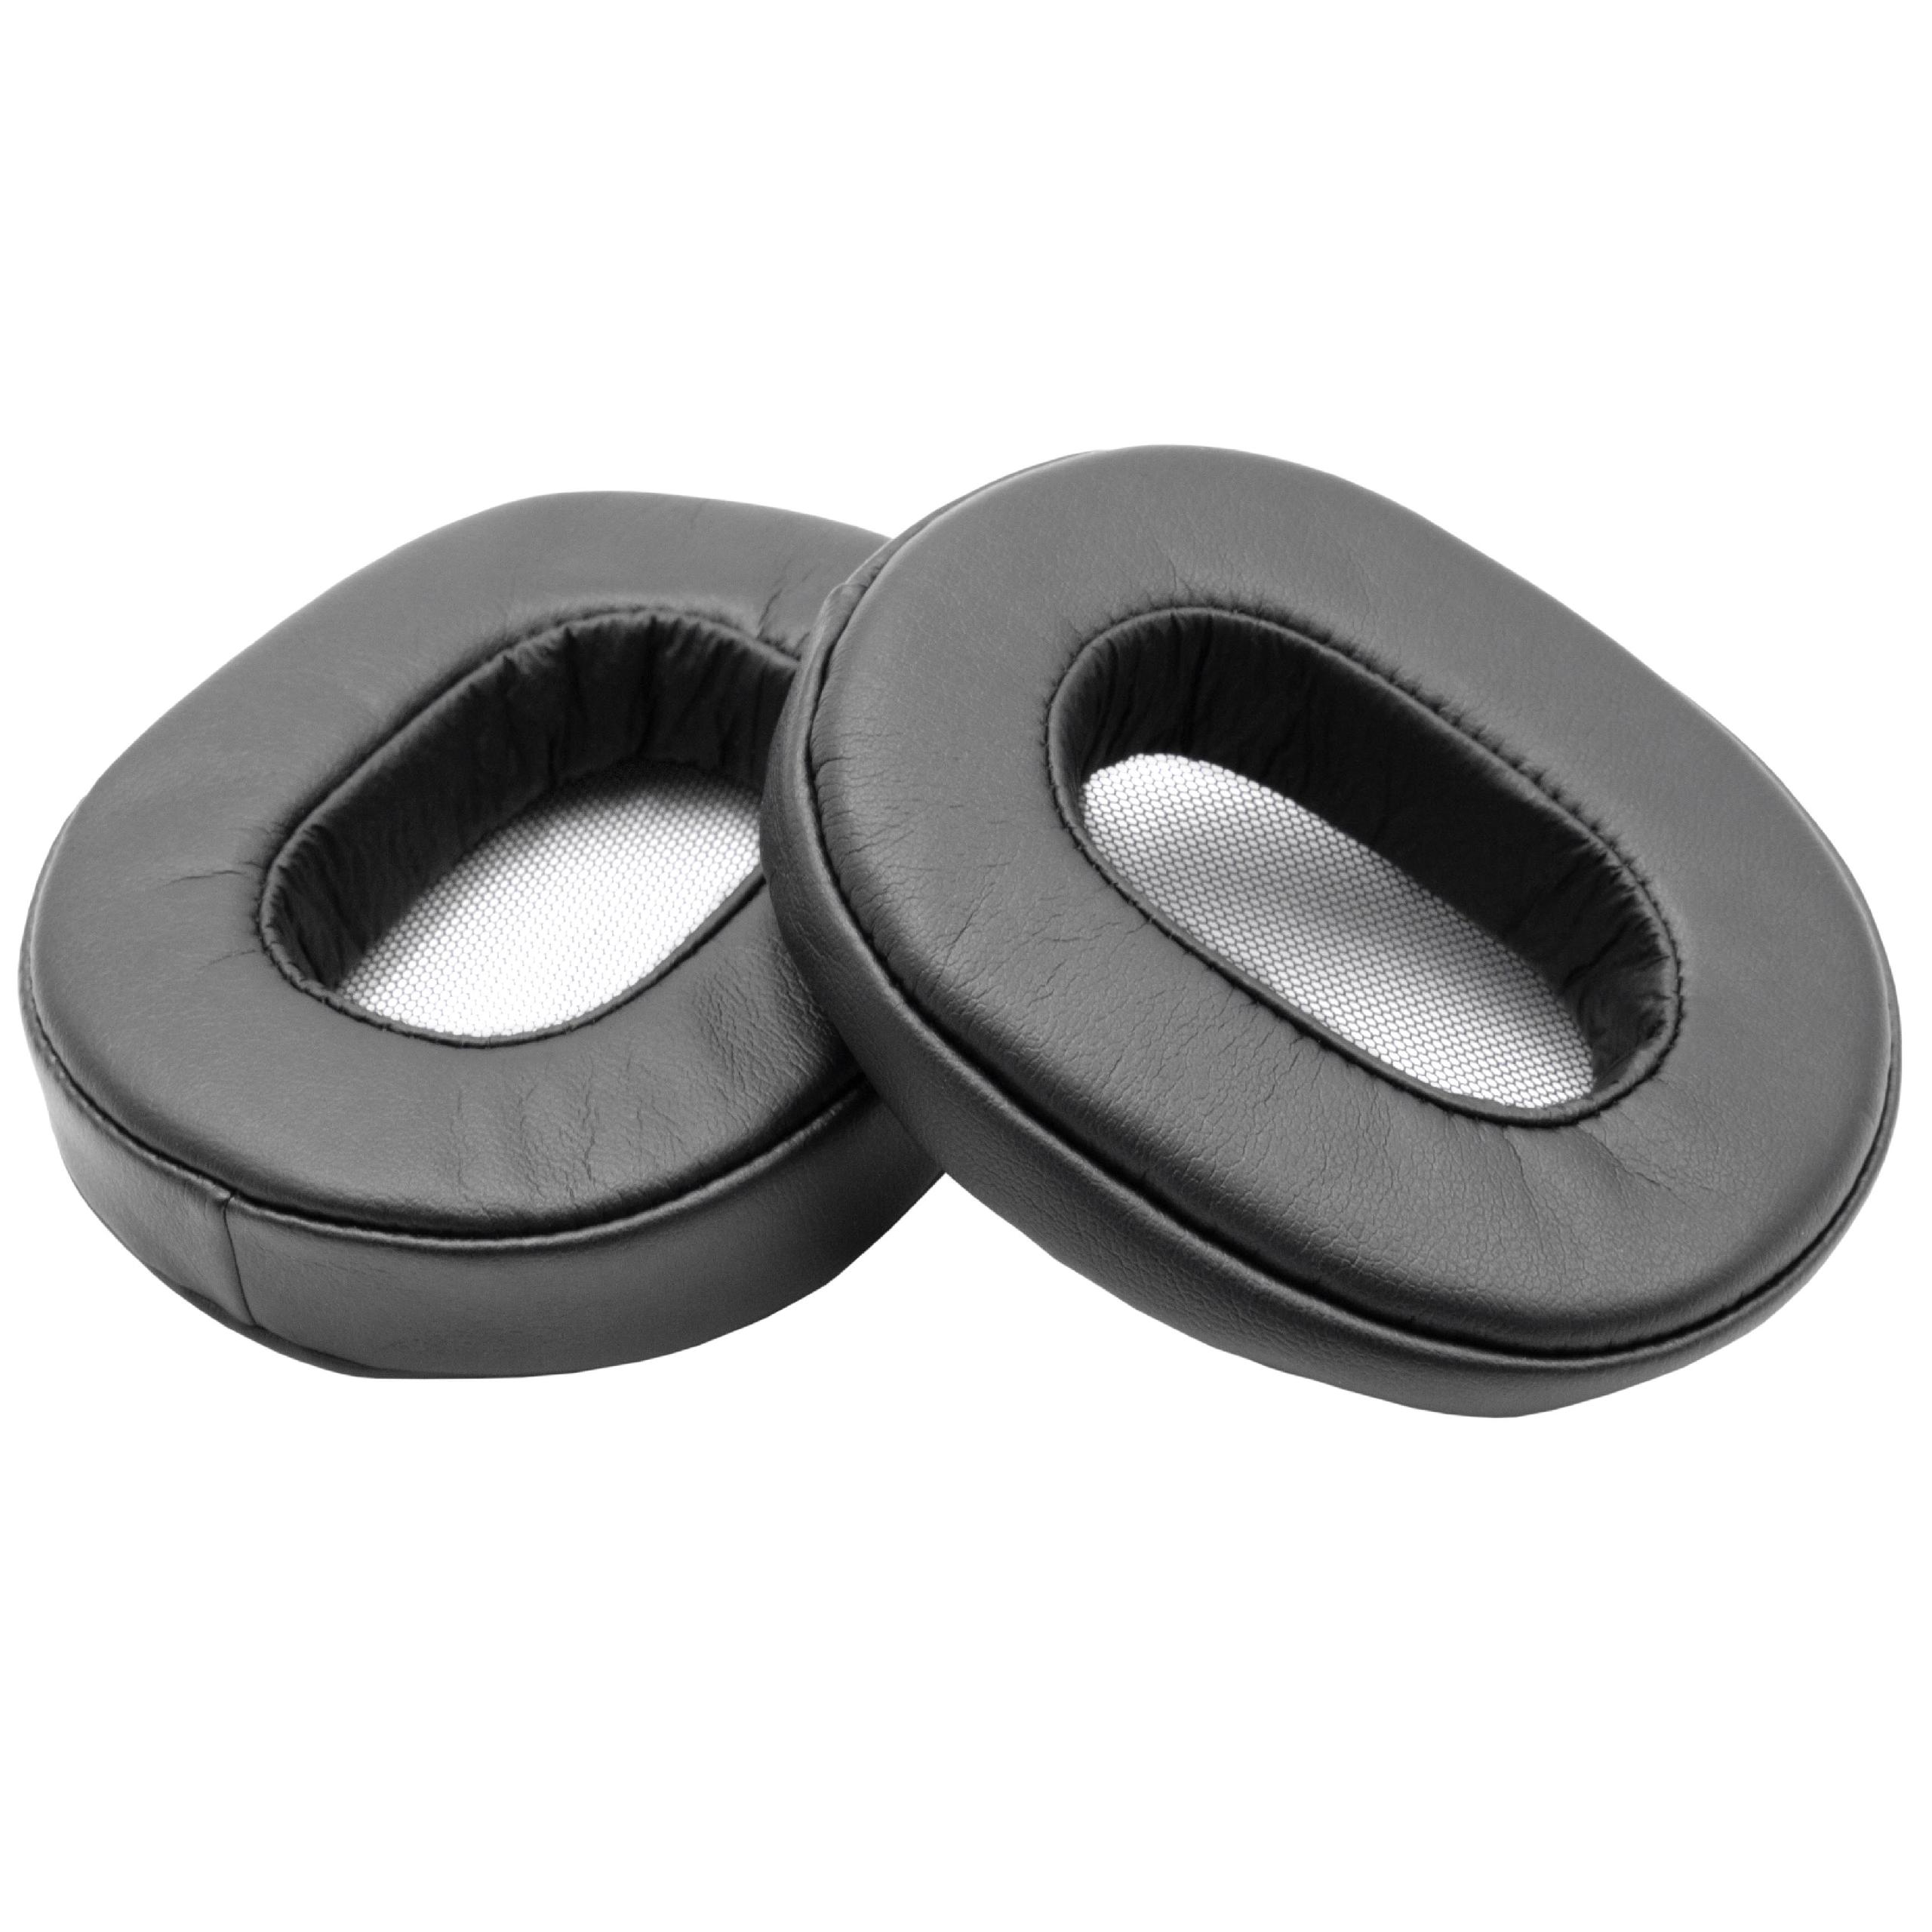 Ear Pads suitable for Sony MDR-1A Headphones etc. - polyurethane / foam, 20 mm thick